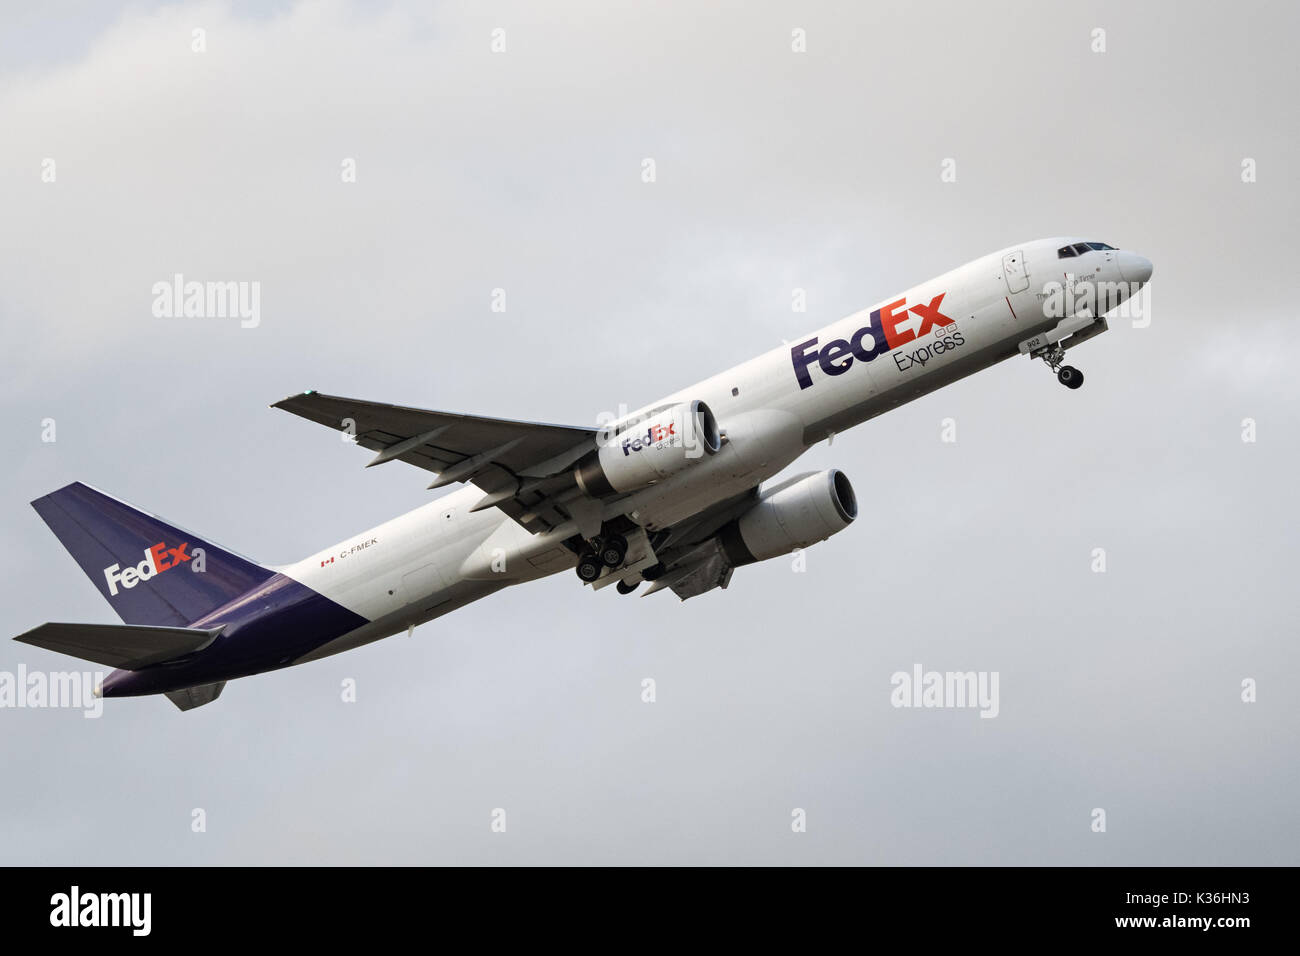 Richmond, British Columbia, Canada. 30th Aug, 2017. A Boeing 757-200F (C-FMEK) air cargo freighter painted in FedEx Express livery takes off from Vancouver International Airport. The cargo jet is owned and operated by Morningstar Air Express Inc. under contract to FedEx Express. Morningstar is headquartered in Edmonton, Alberta, Canada. Credit: Bayne Stanley/ZUMA Wire/Alamy Live News Stock Photo